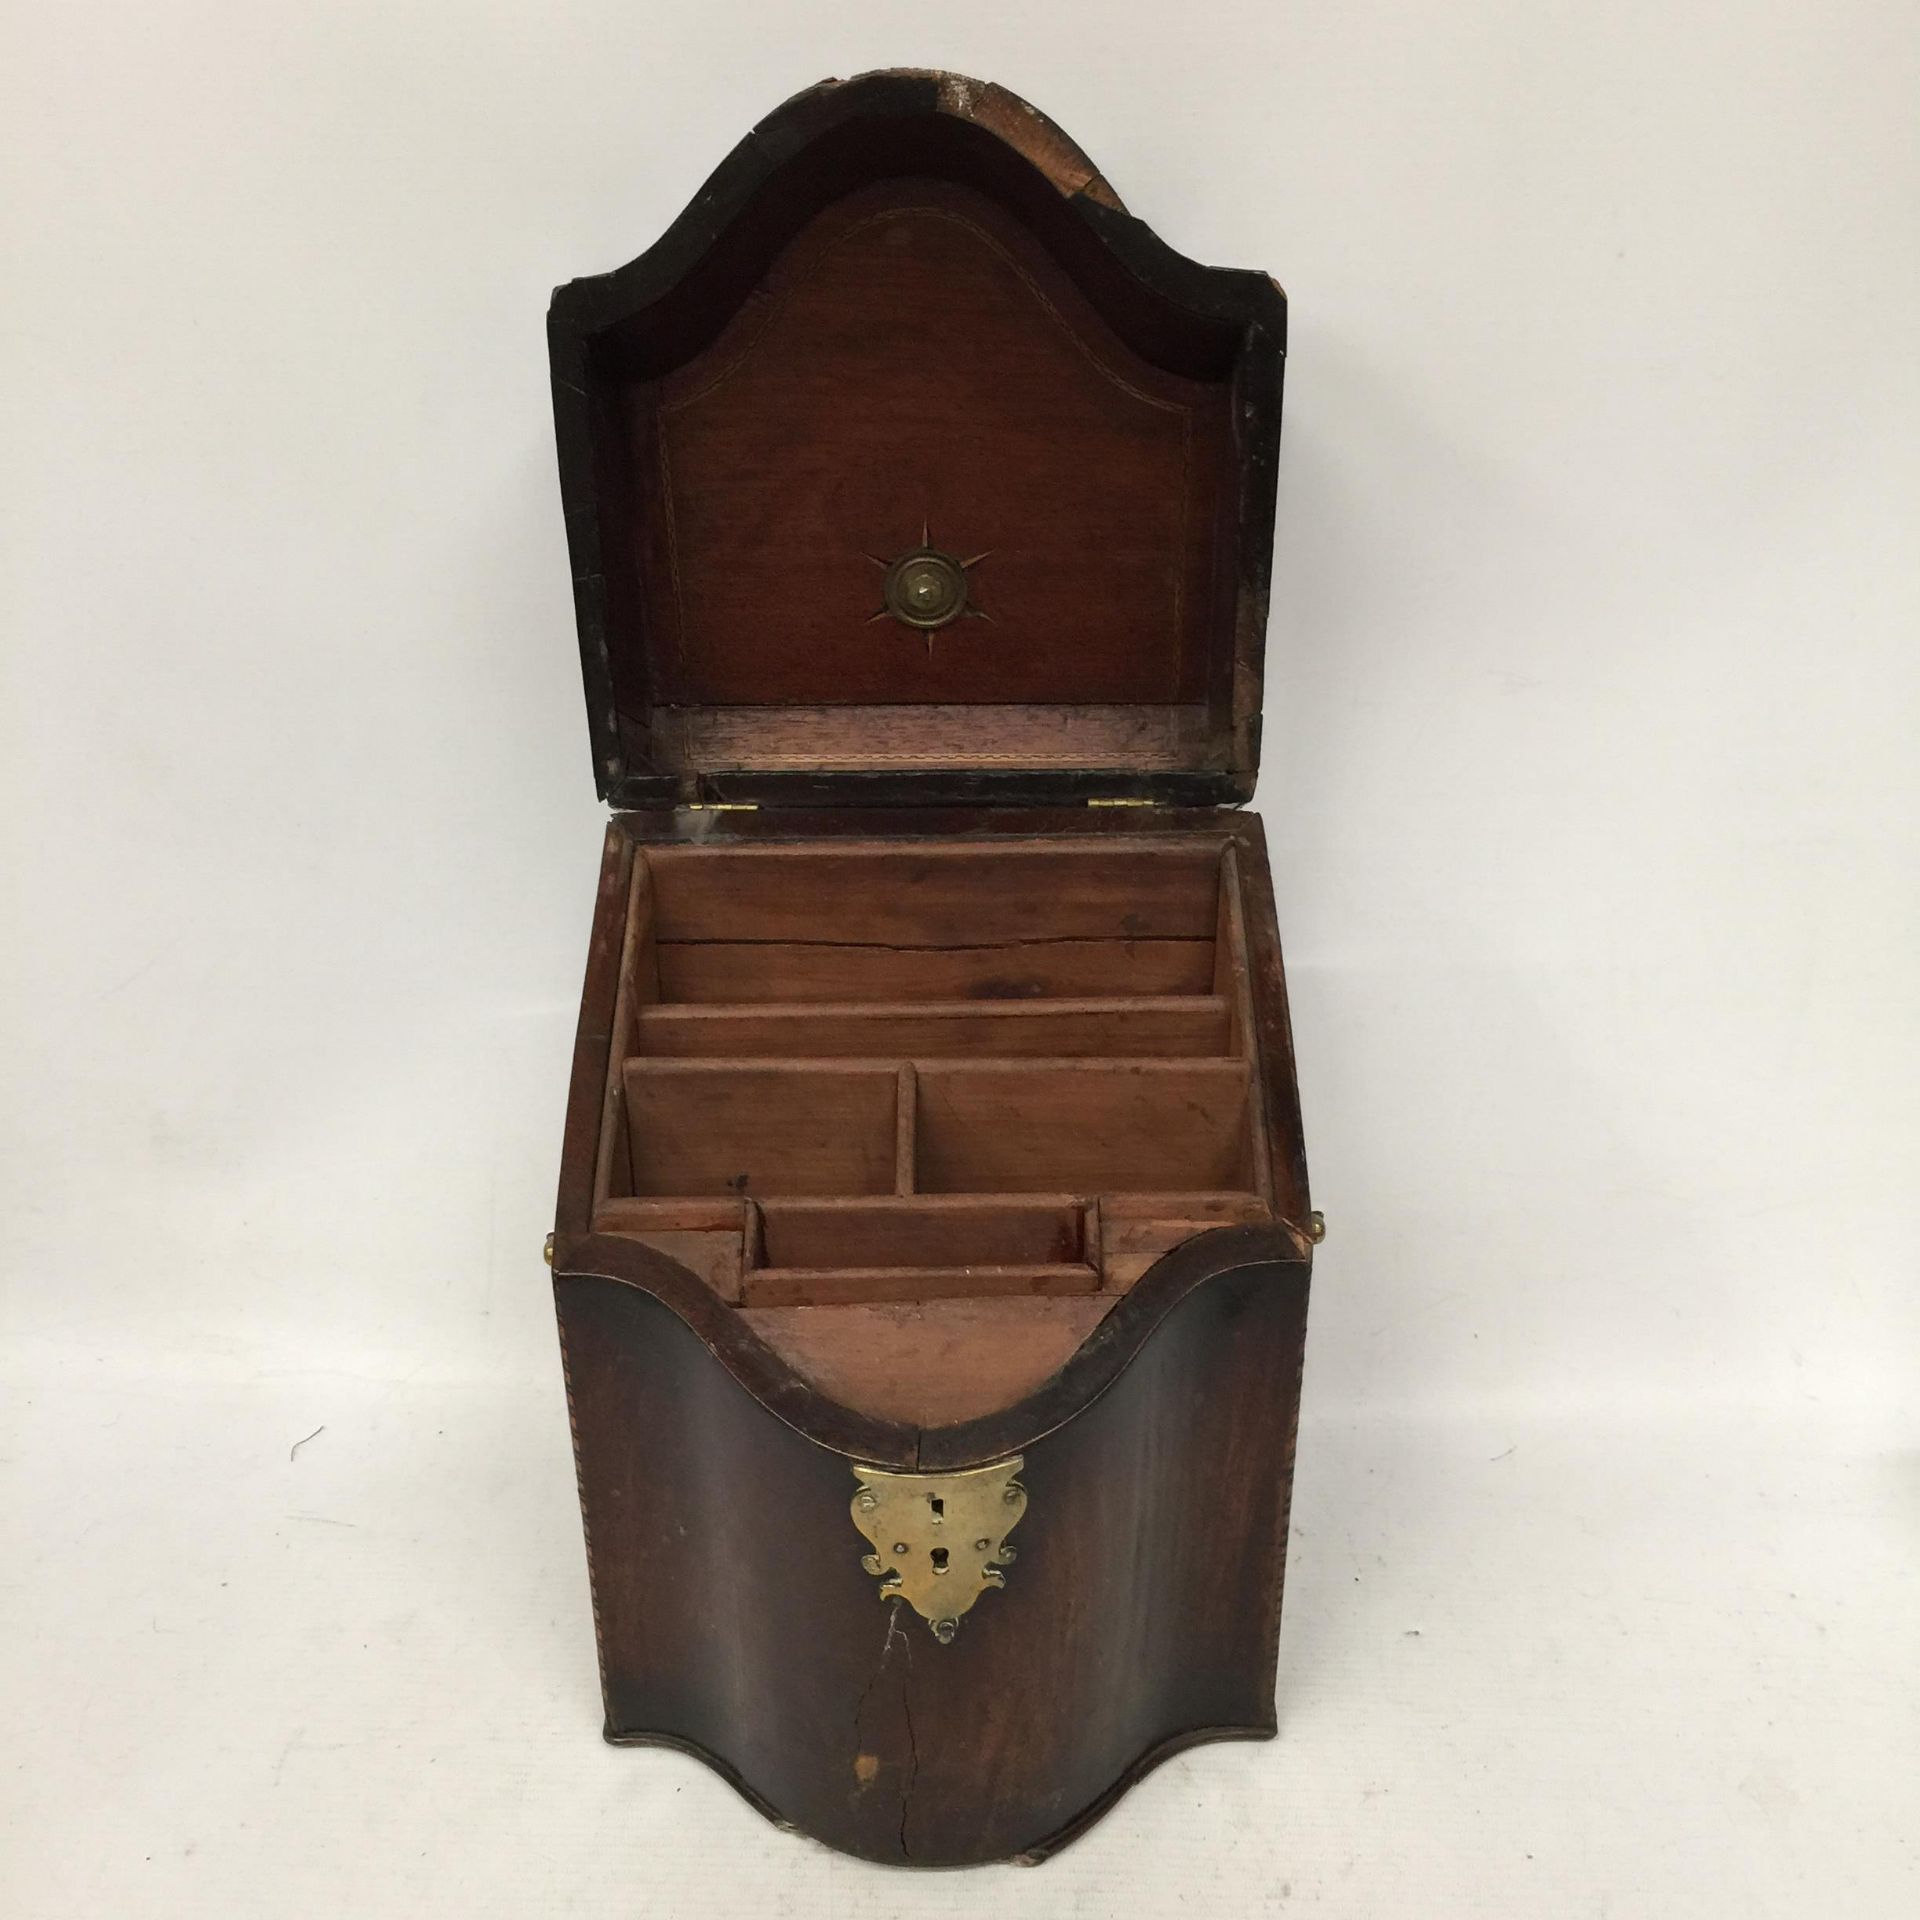 A GEORGIAN MAHOGANY KNIFE BOX WITH BRASS FITTINGS - Image 2 of 4